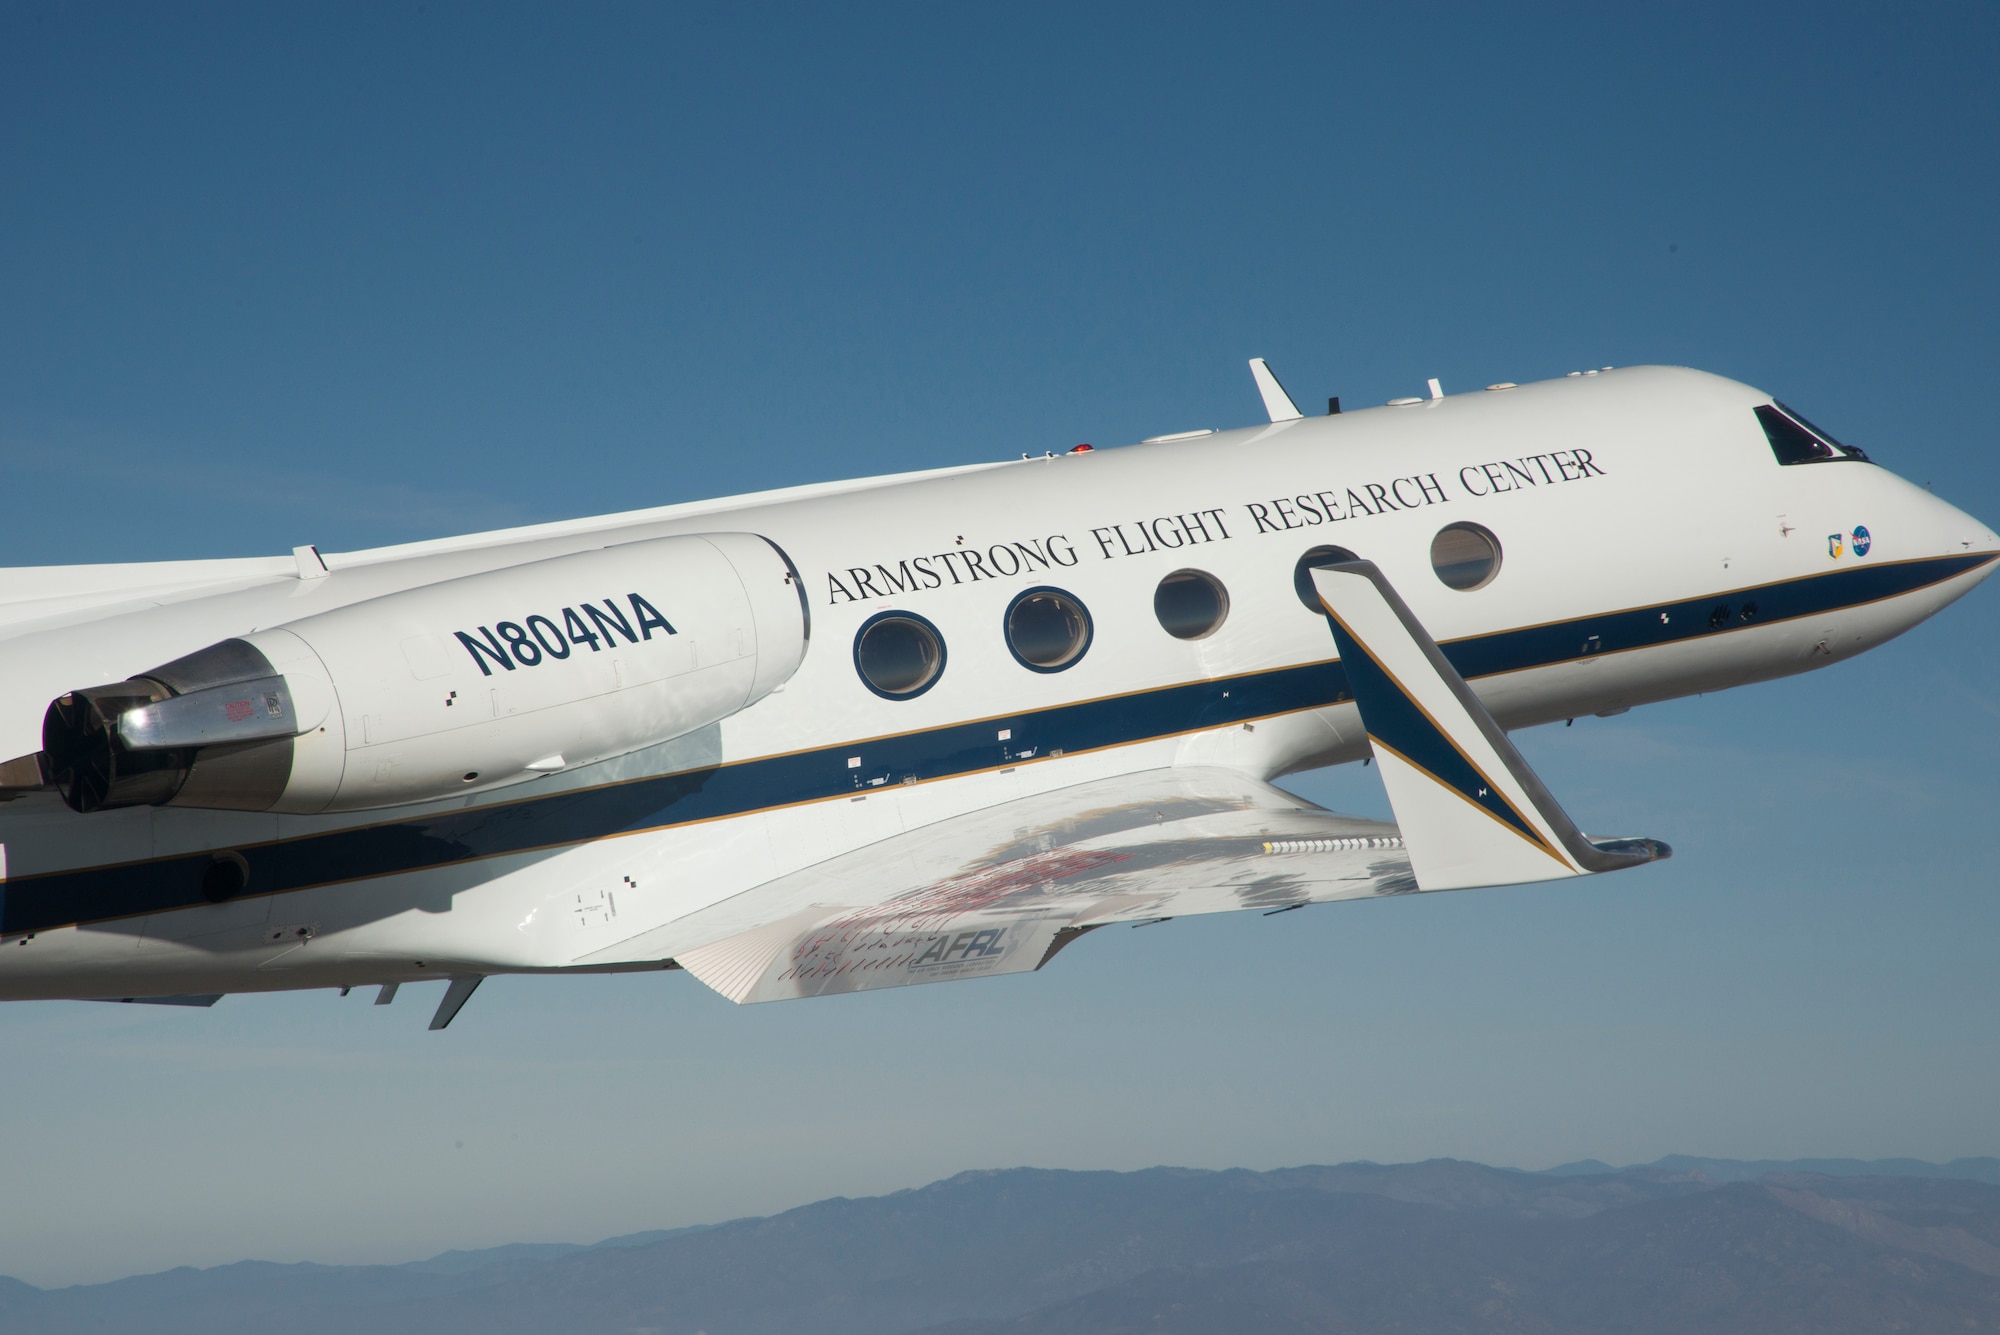 The modified Gulfstream III flight research aircraft with an adaptive compliant wing trailing edge is shown with 25 degrees of trailing edge deflection. (Courtesy photo)